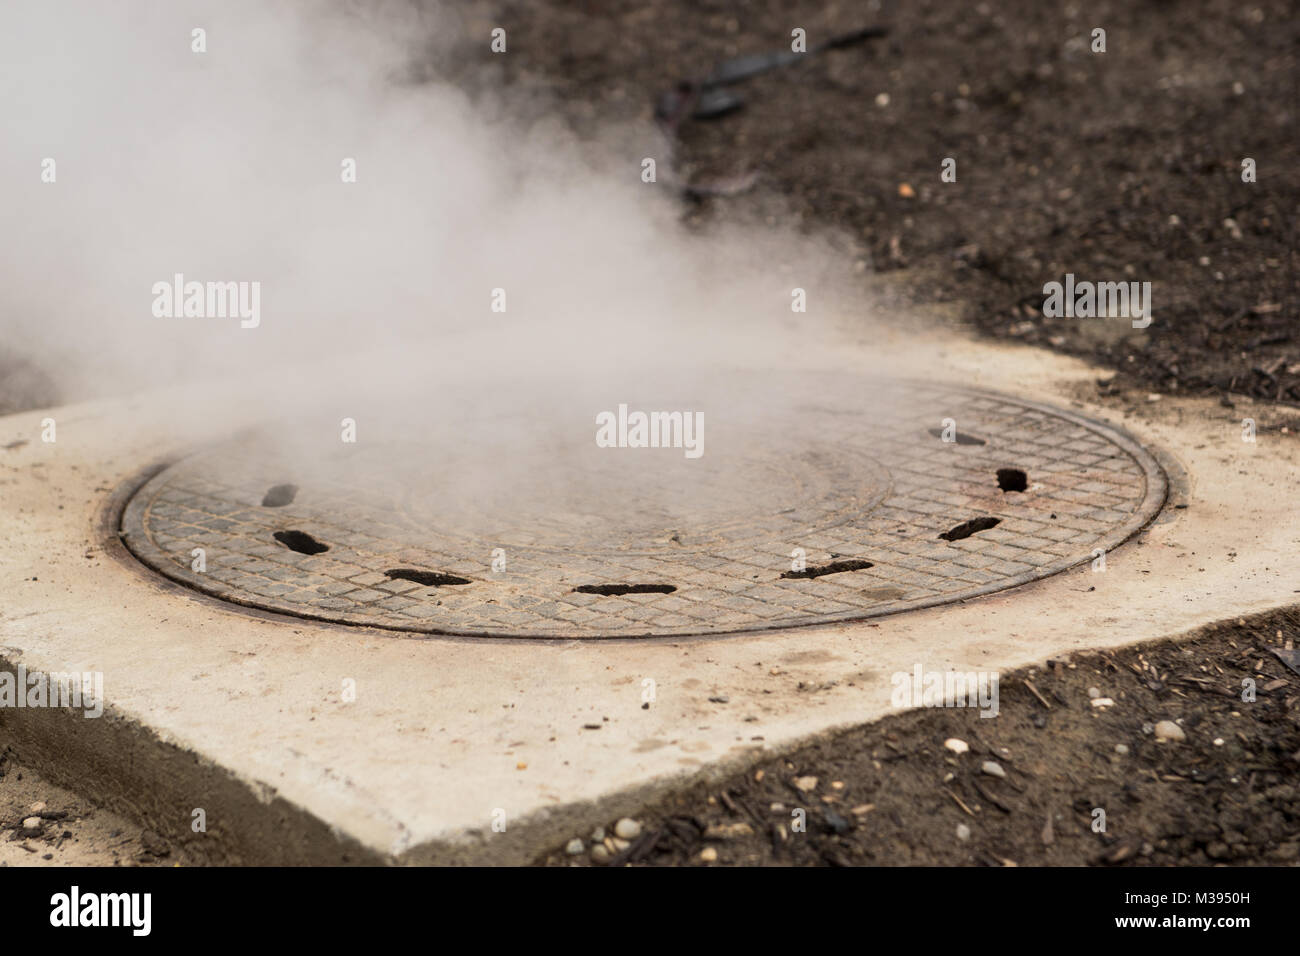 Hot white steam coming out of metal manhole or metal hatch Stock Photo